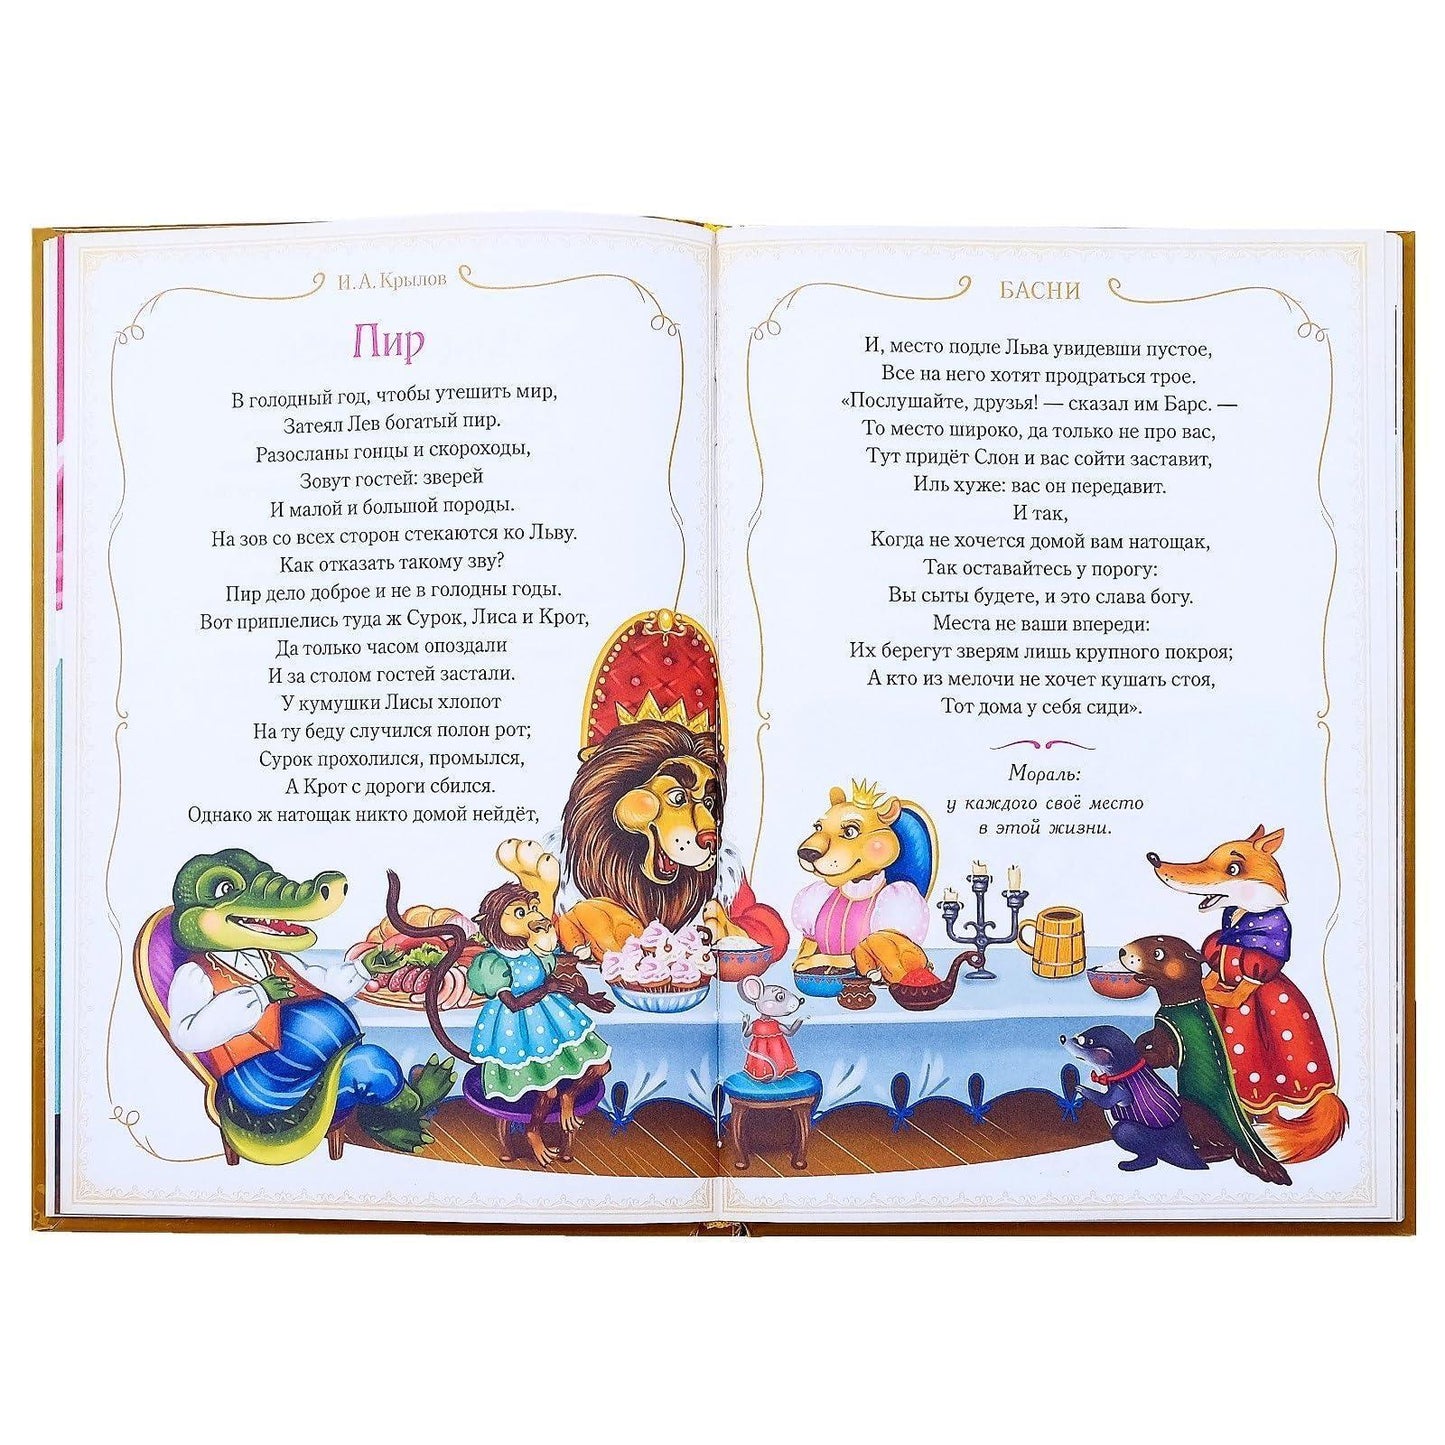 Hardcover Russian Book of Fables by Krylov 128 pgs Russian Books in Russian Language Книги На Русском Языке И.А. Крылов Басни - Loomini